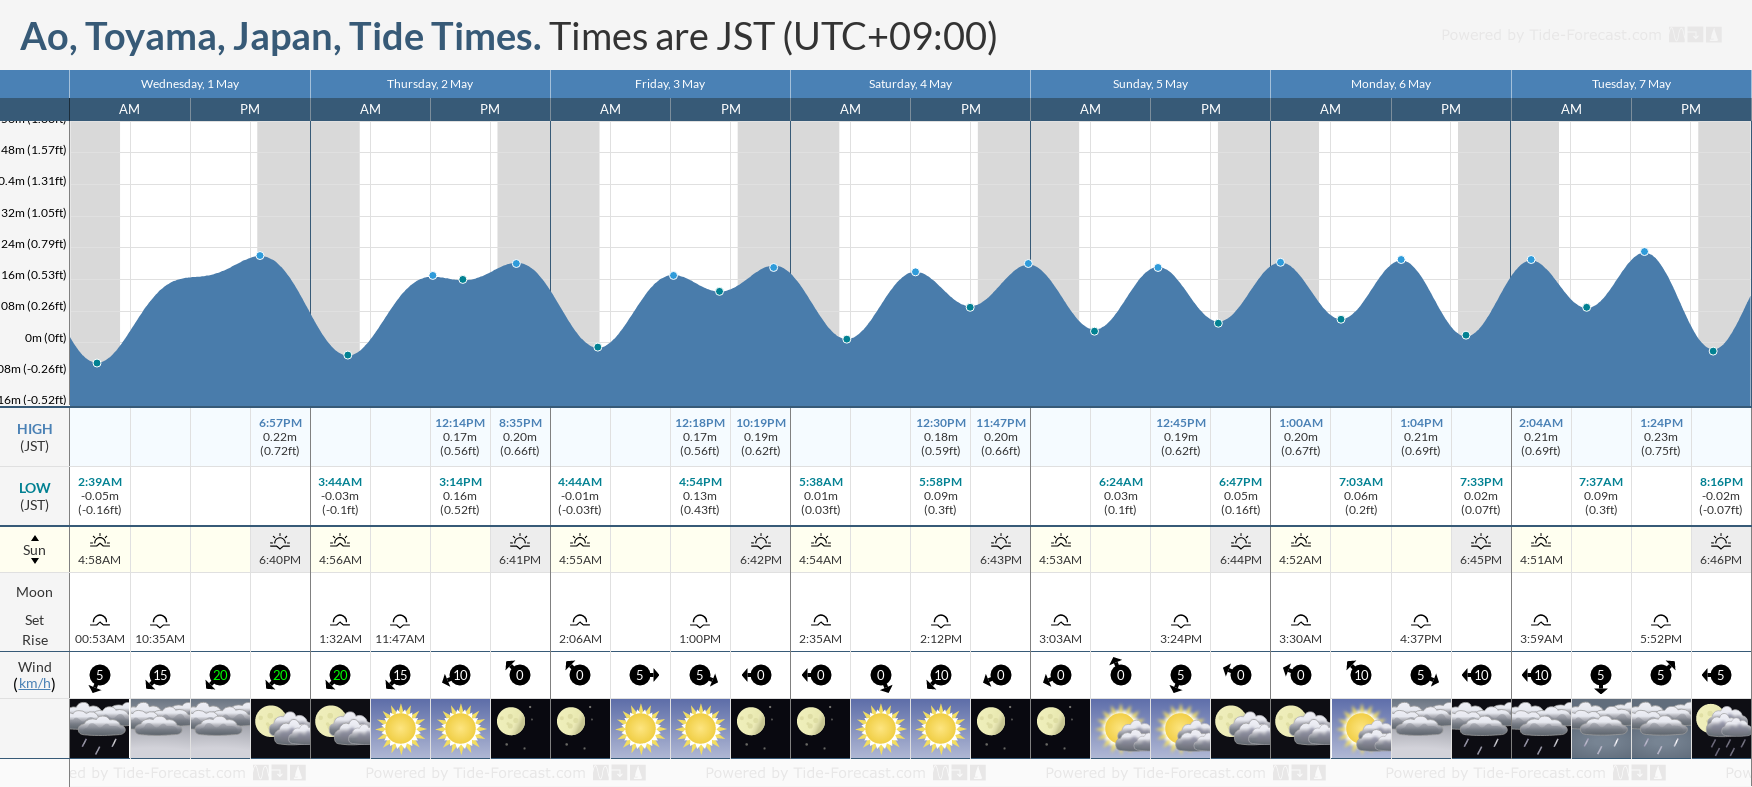 Ao, Toyama, Japan Tide Chart including high and low tide tide times for the next 7 days